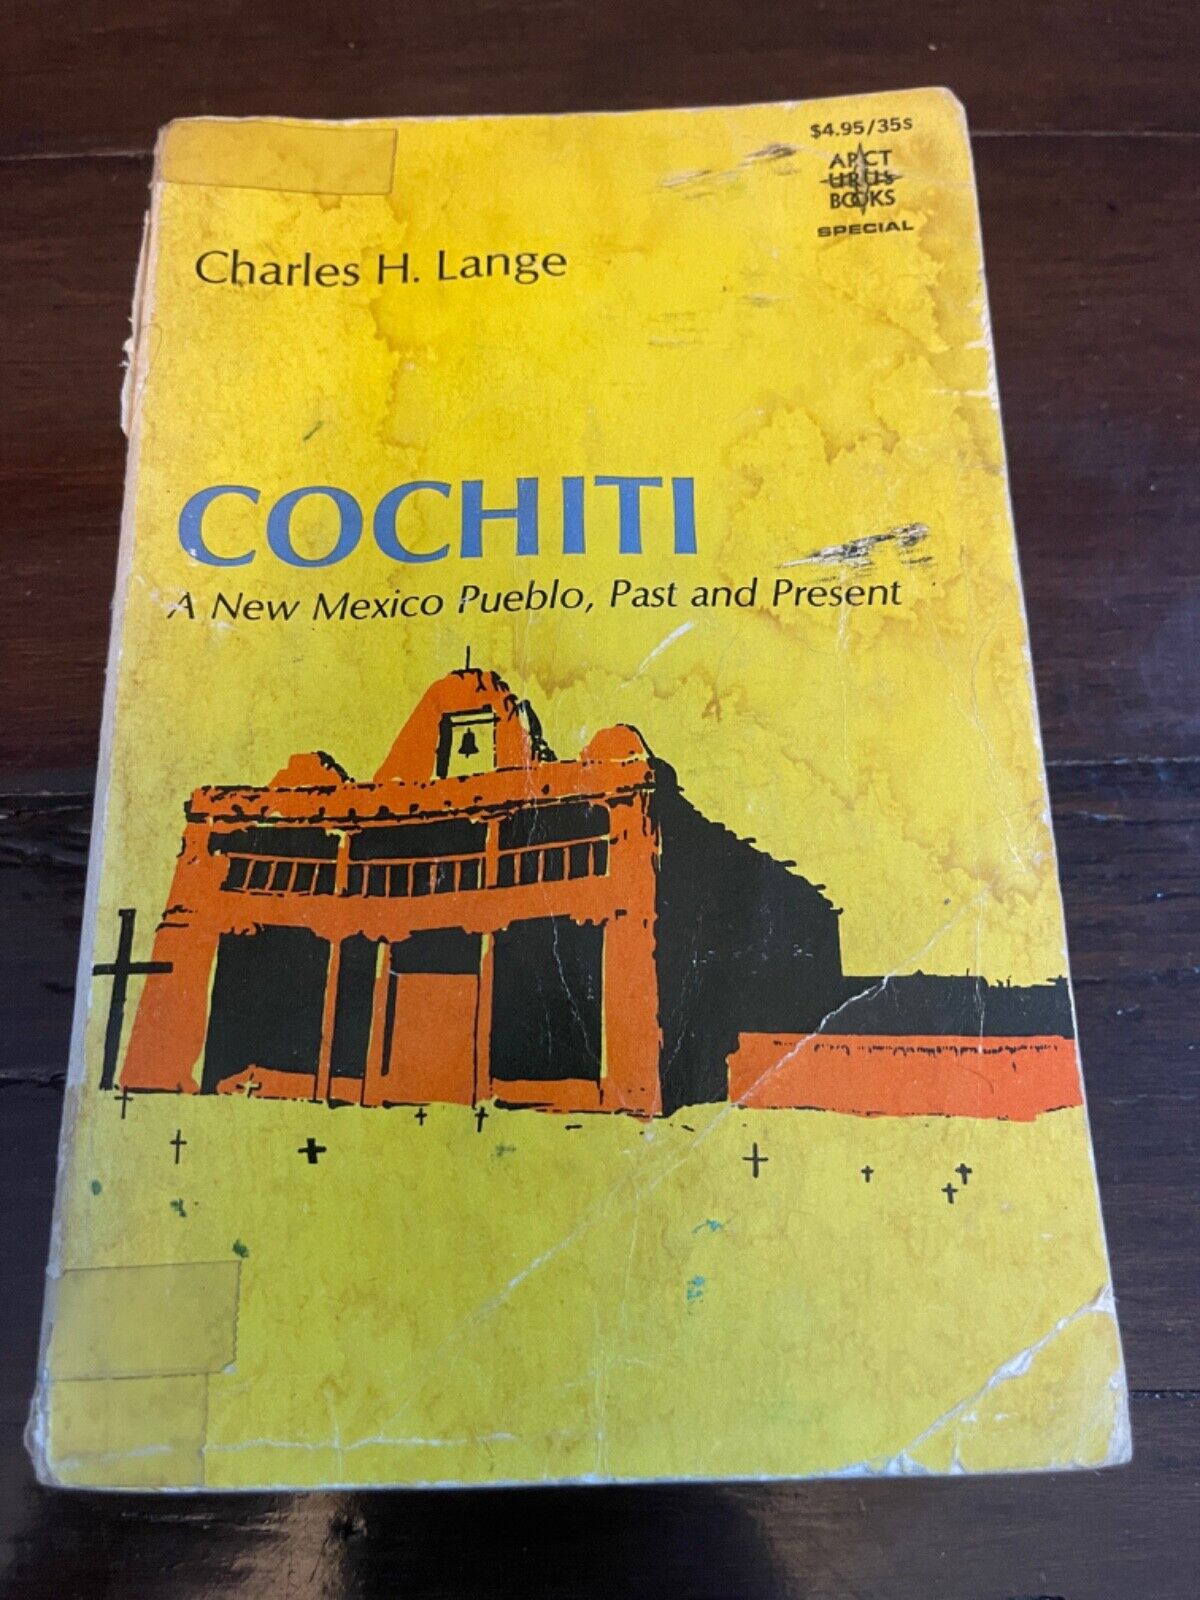 Book - Cochiti, A New Mexico Pueblo, Past And Present By Charles H. Lange (nm)